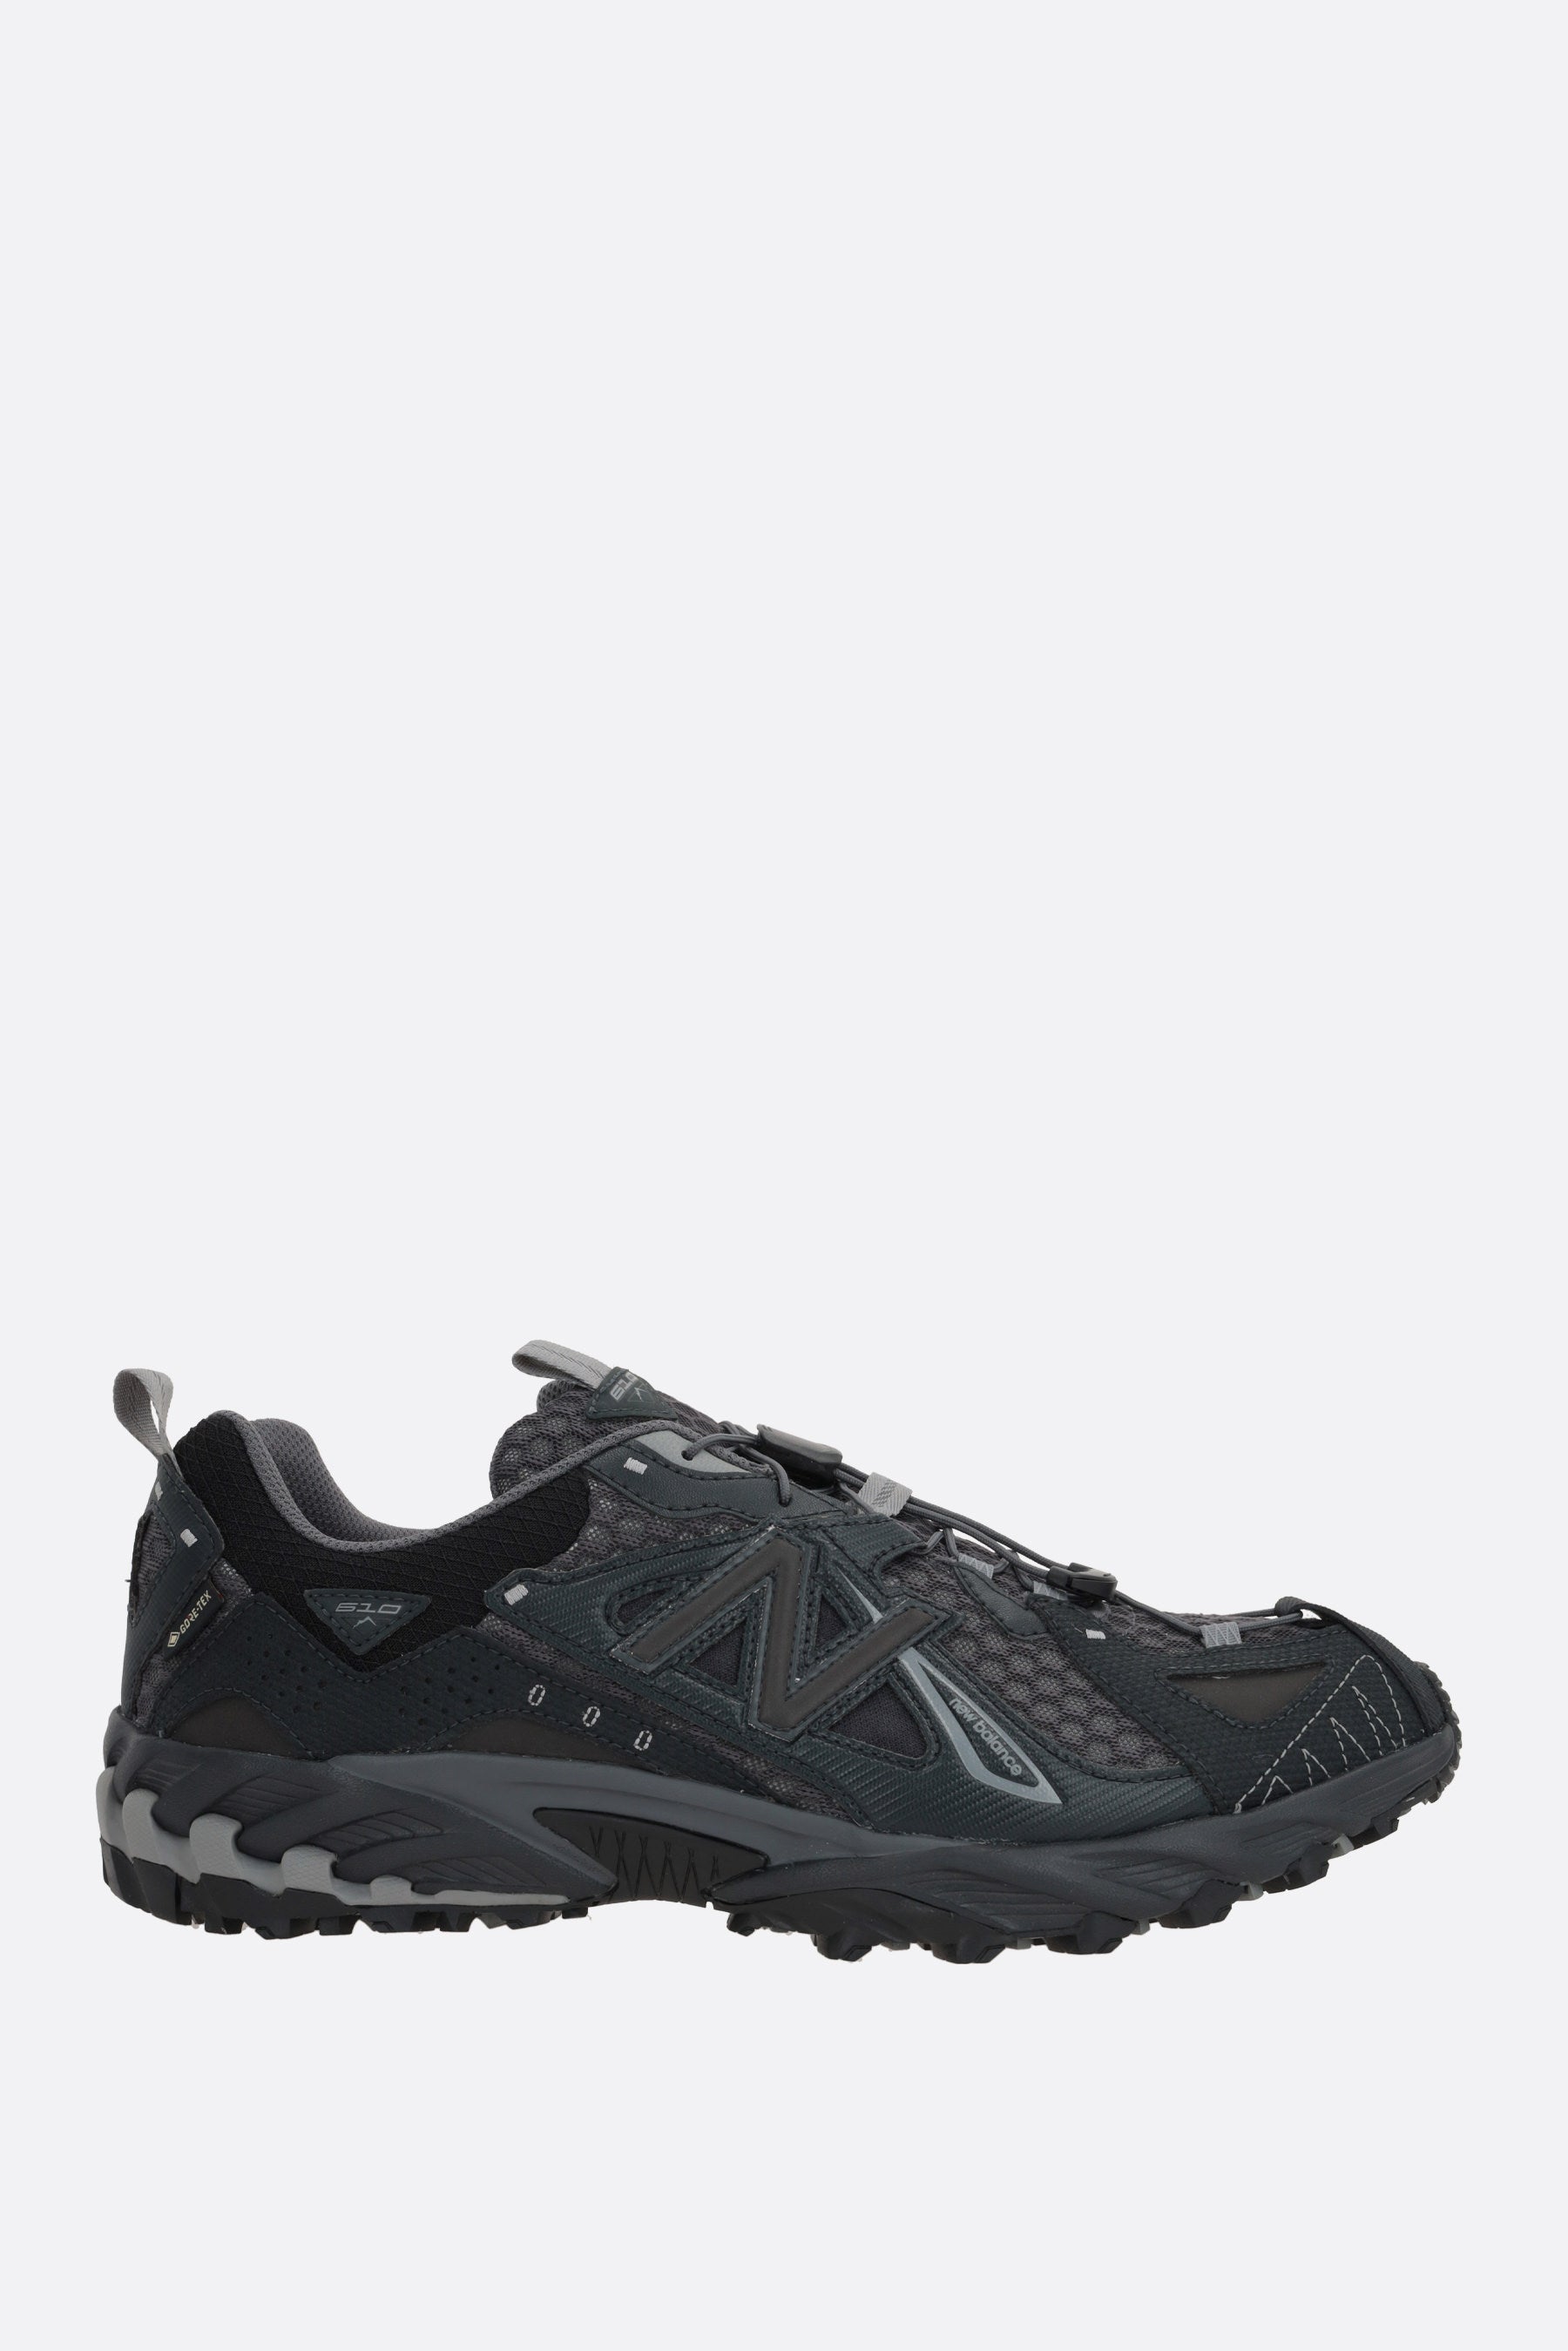 610Xv1 sneakers in GORE-TEX® fabric and mesh